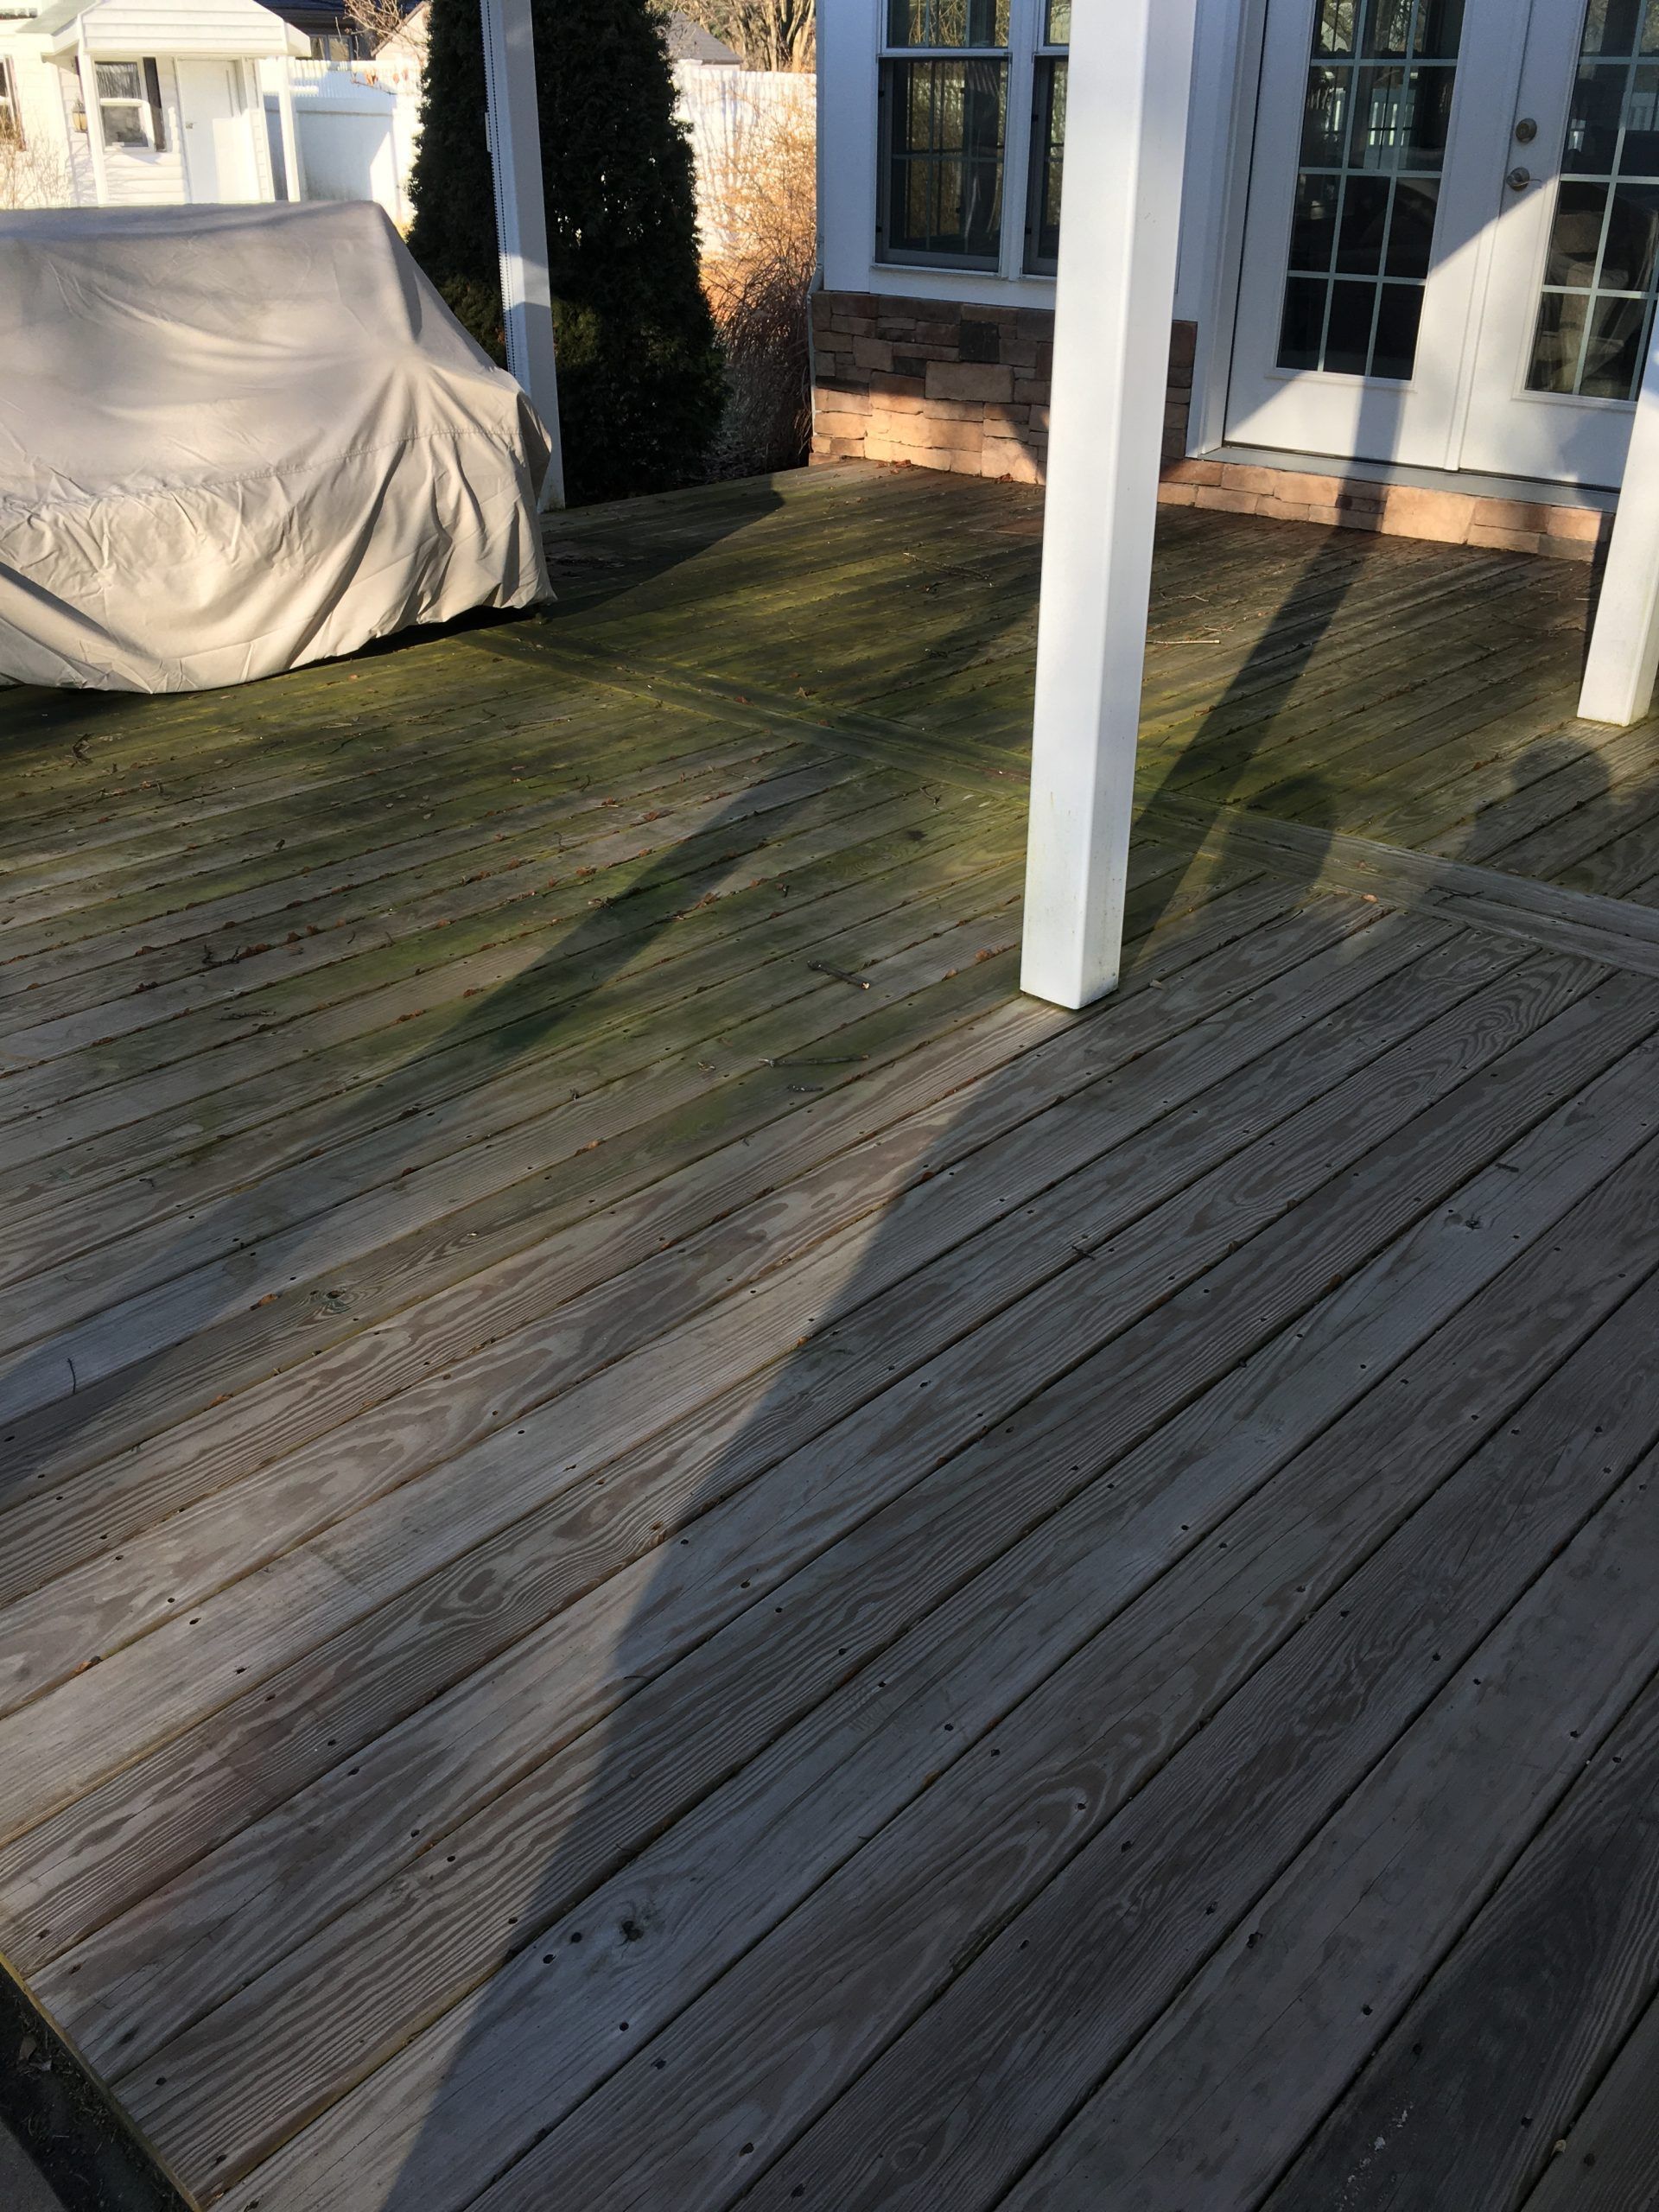 Before Deck Cleaning